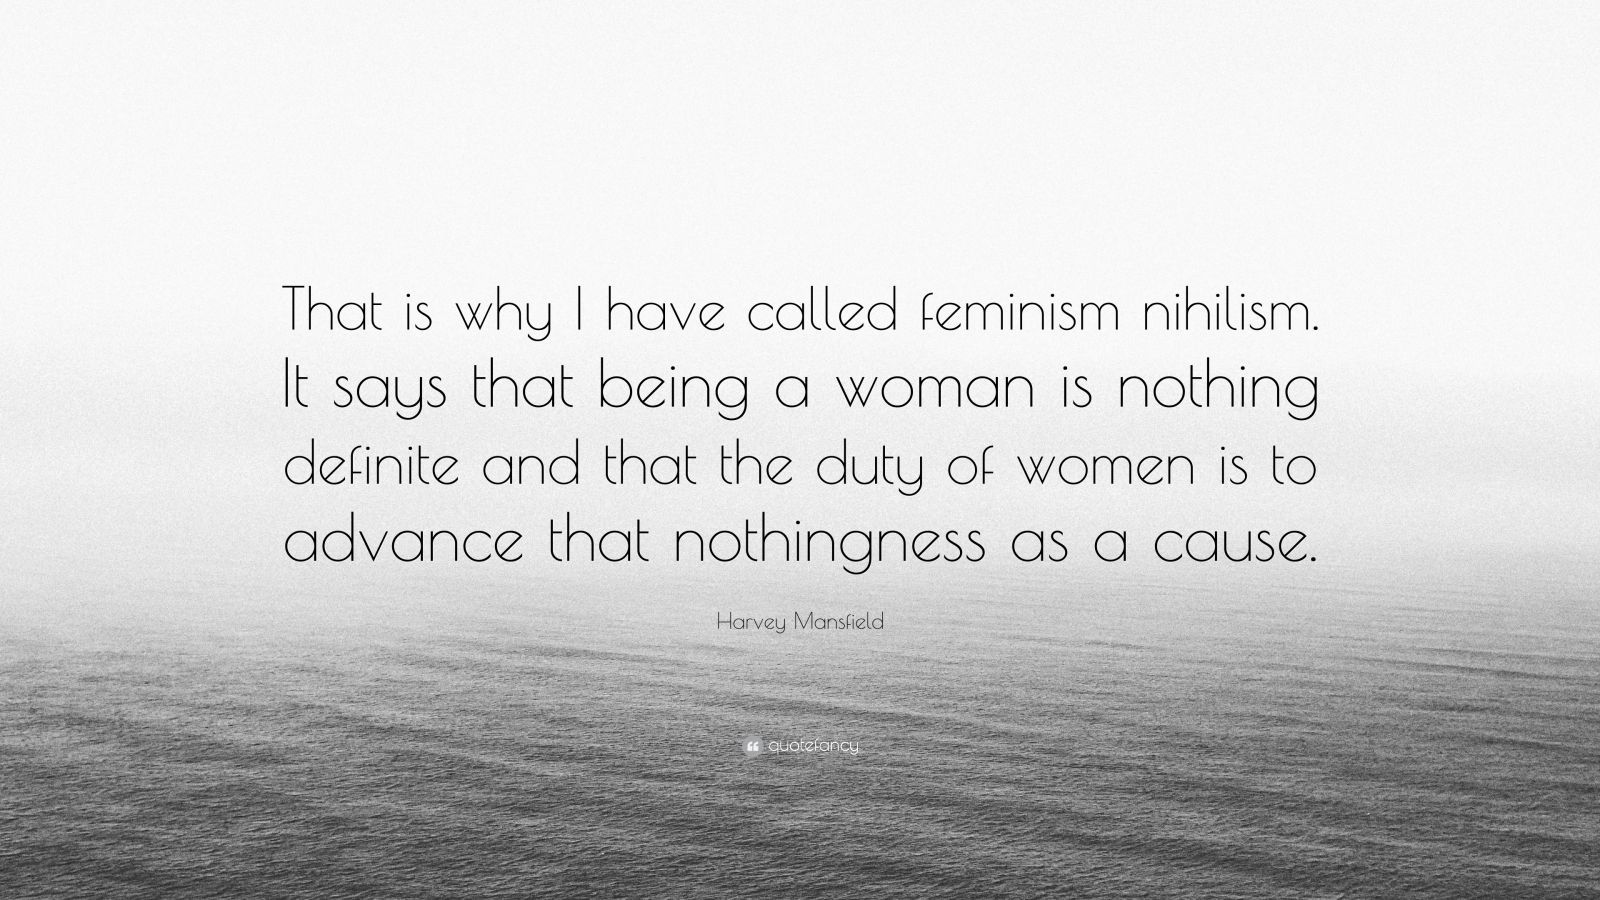 Harvey Mansfield Quote: “That is why I have called feminism nihilism. It says that being a woman is nothing definite and that the duty of women i.” (7 wallpaper)